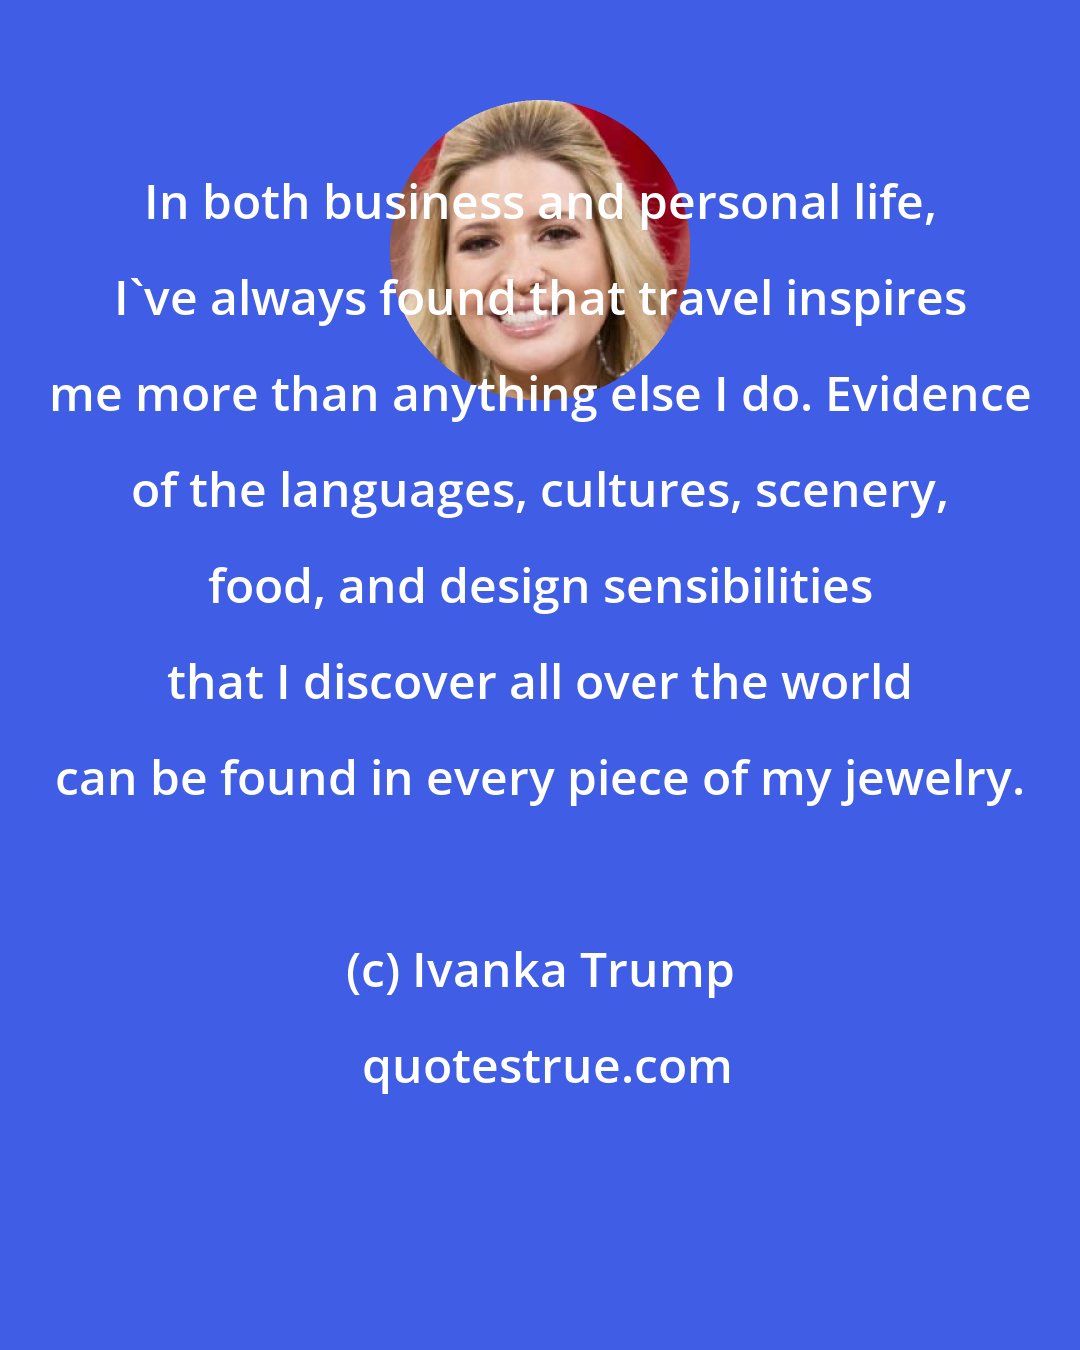 Ivanka Trump: In both business and personal life, I've always found that travel inspires me more than anything else I do. Evidence of the languages, cultures, scenery, food, and design sensibilities that I discover all over the world can be found in every piece of my jewelry.